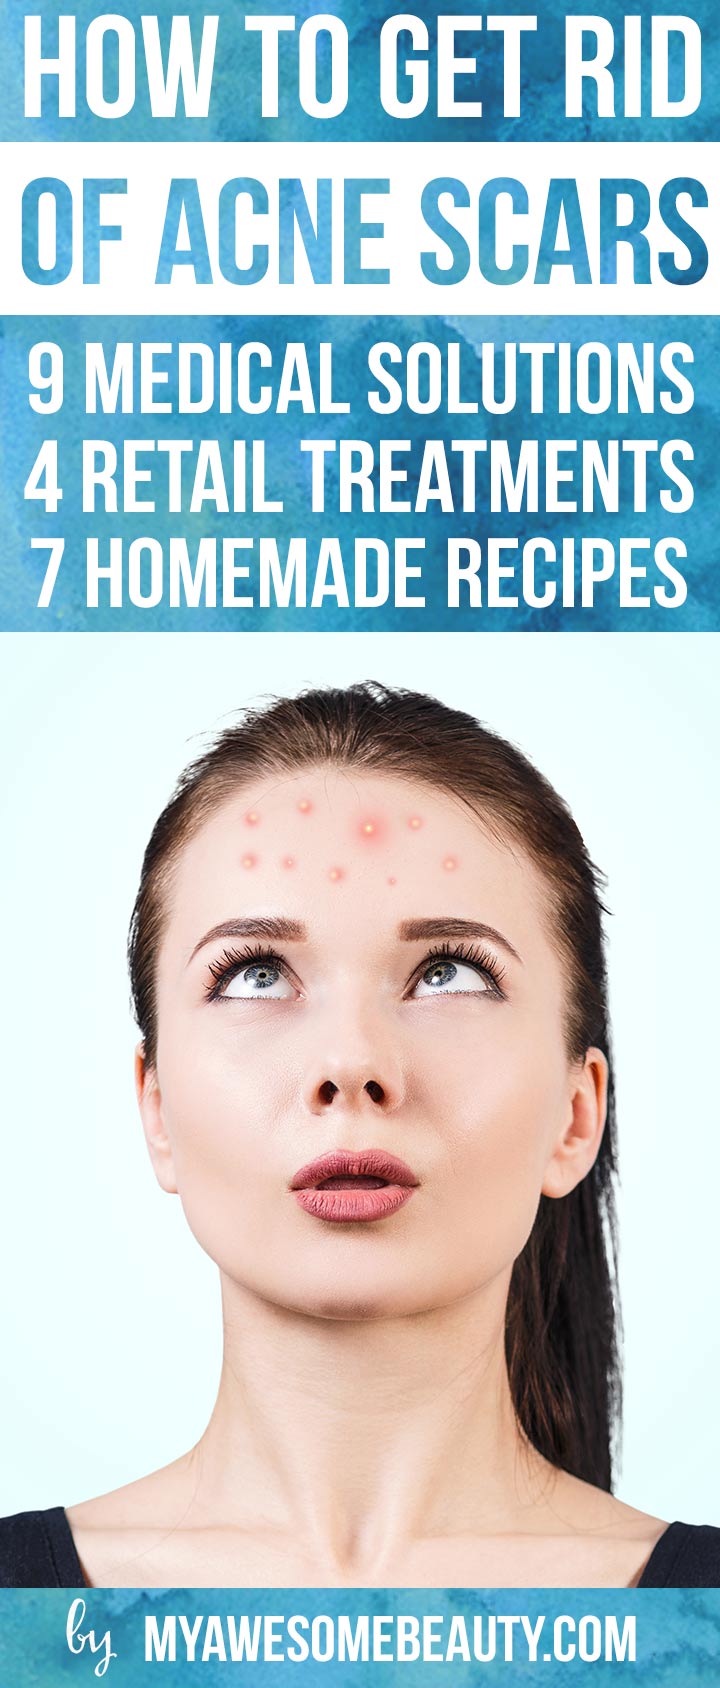 how to get rid of acne scars fast | the 20 best treatments and tips